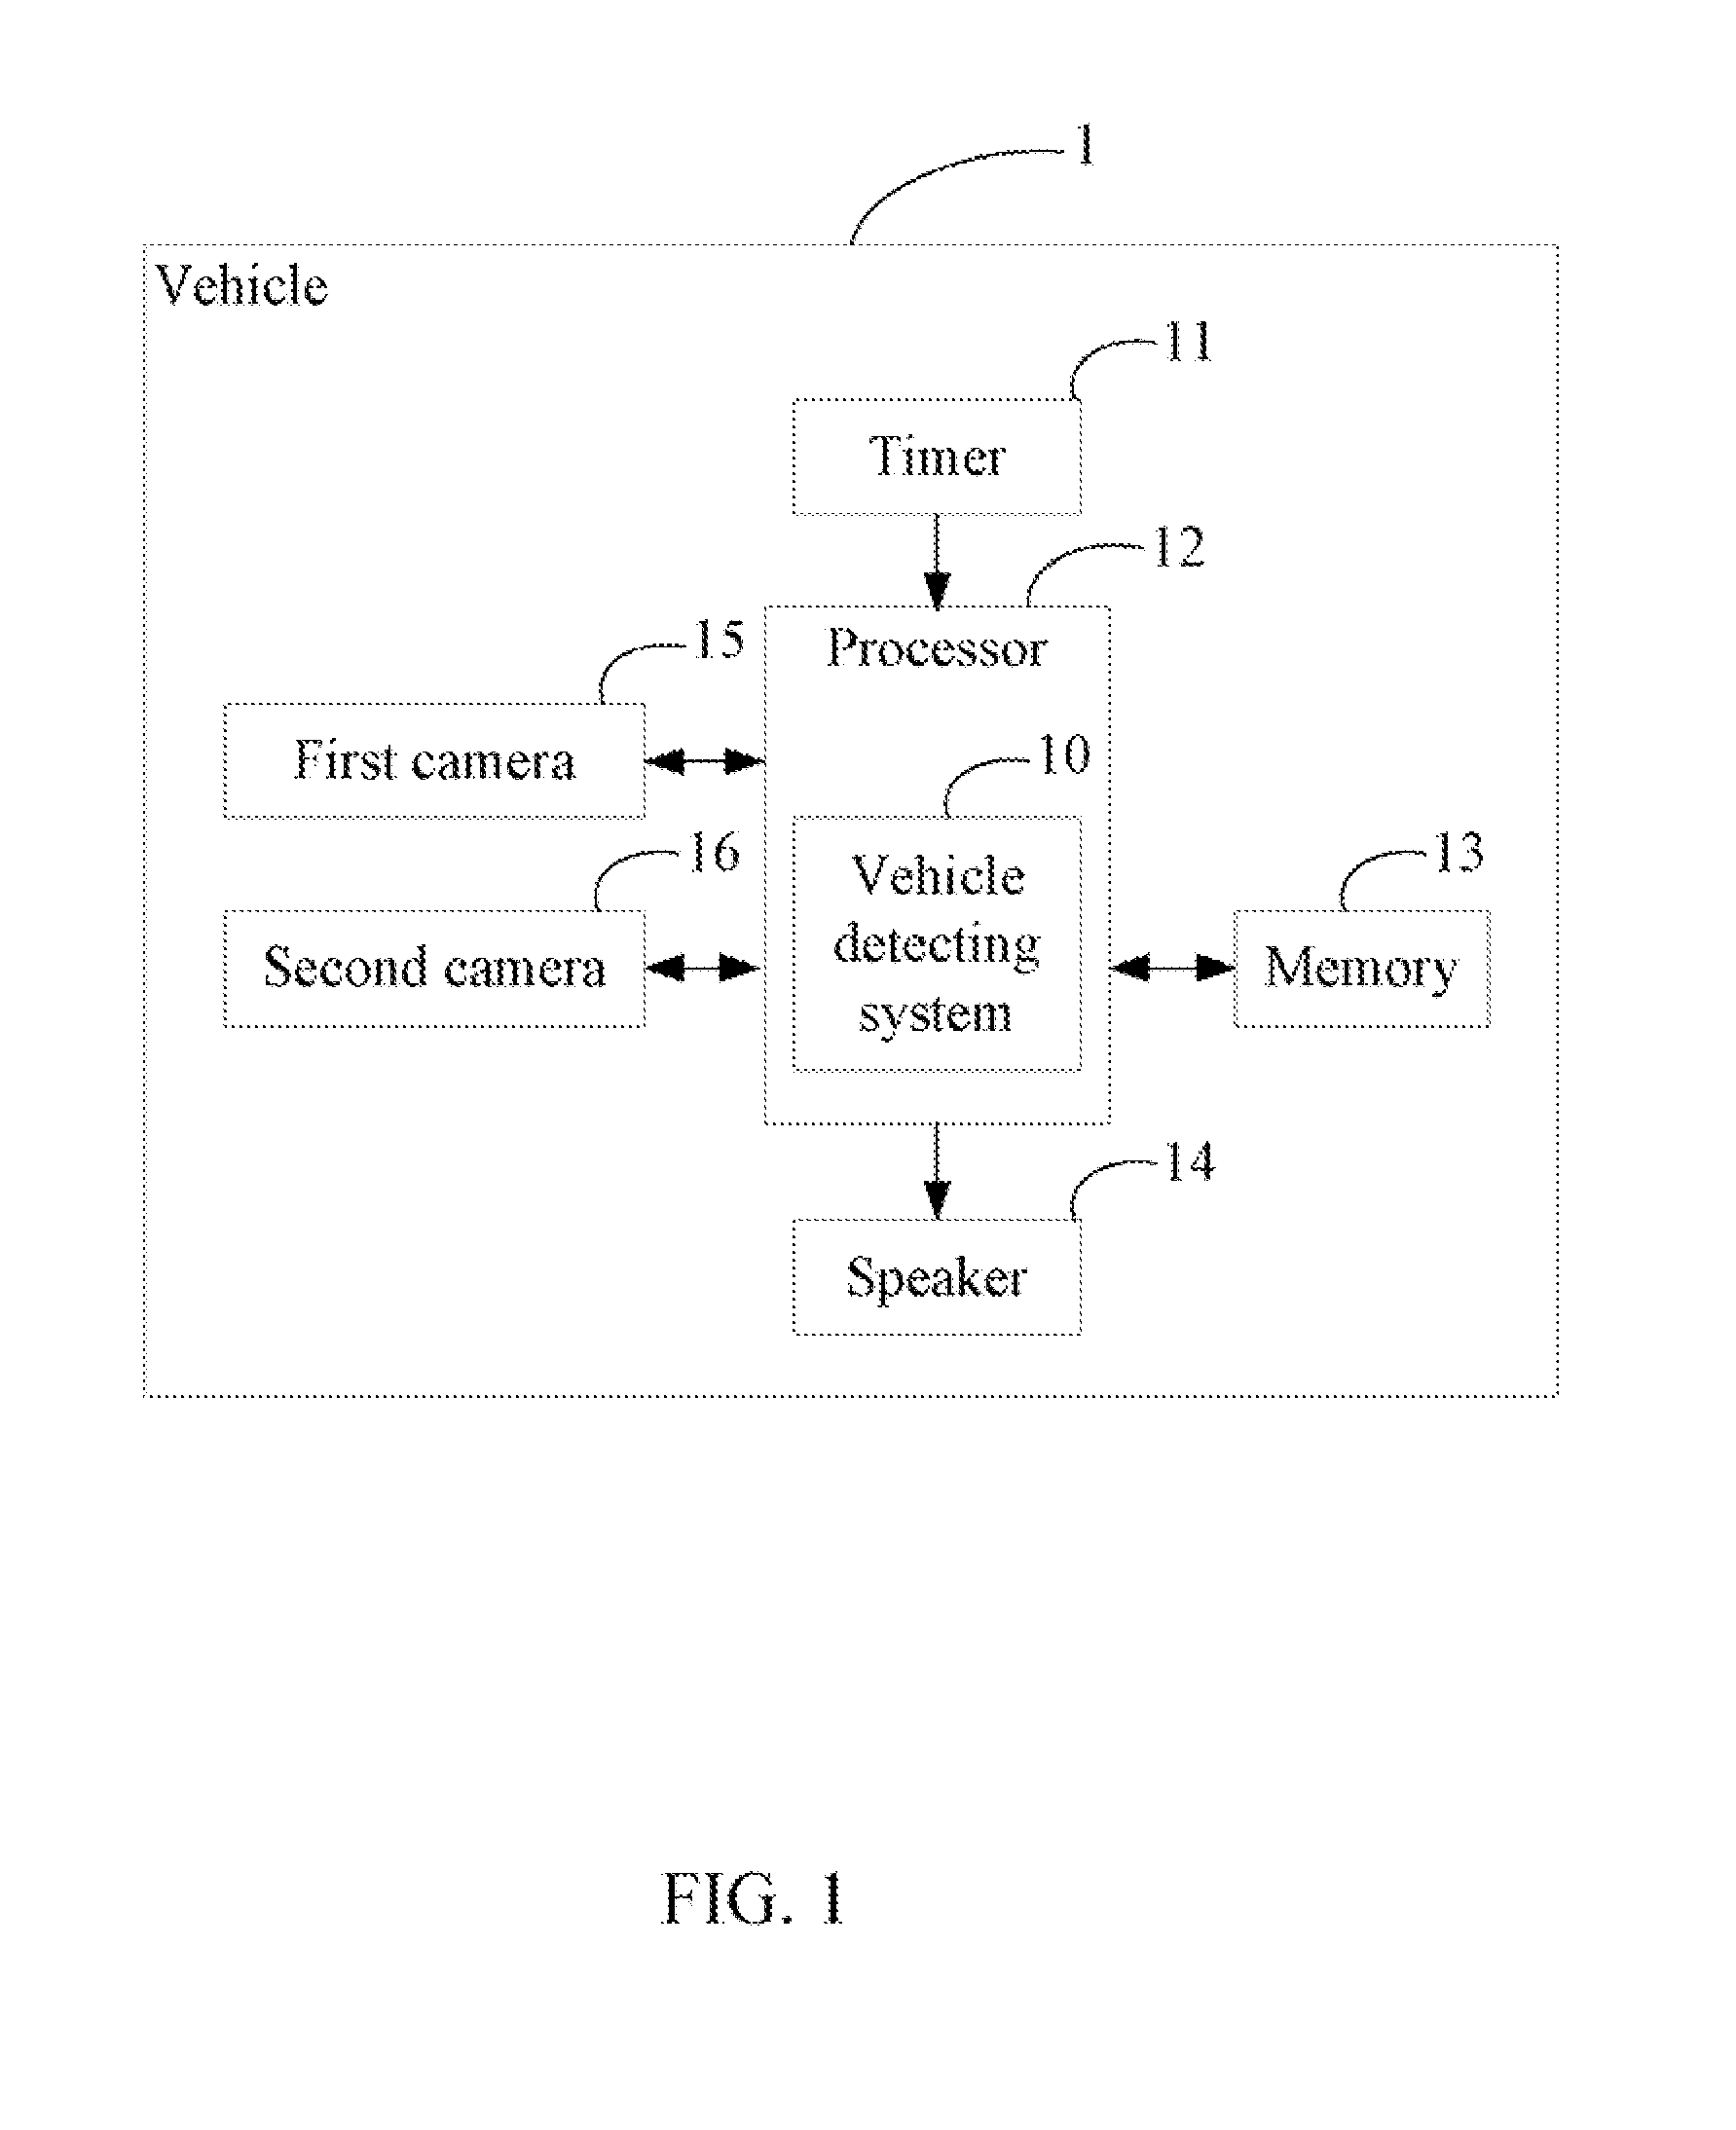 Vehicle detecting system and method